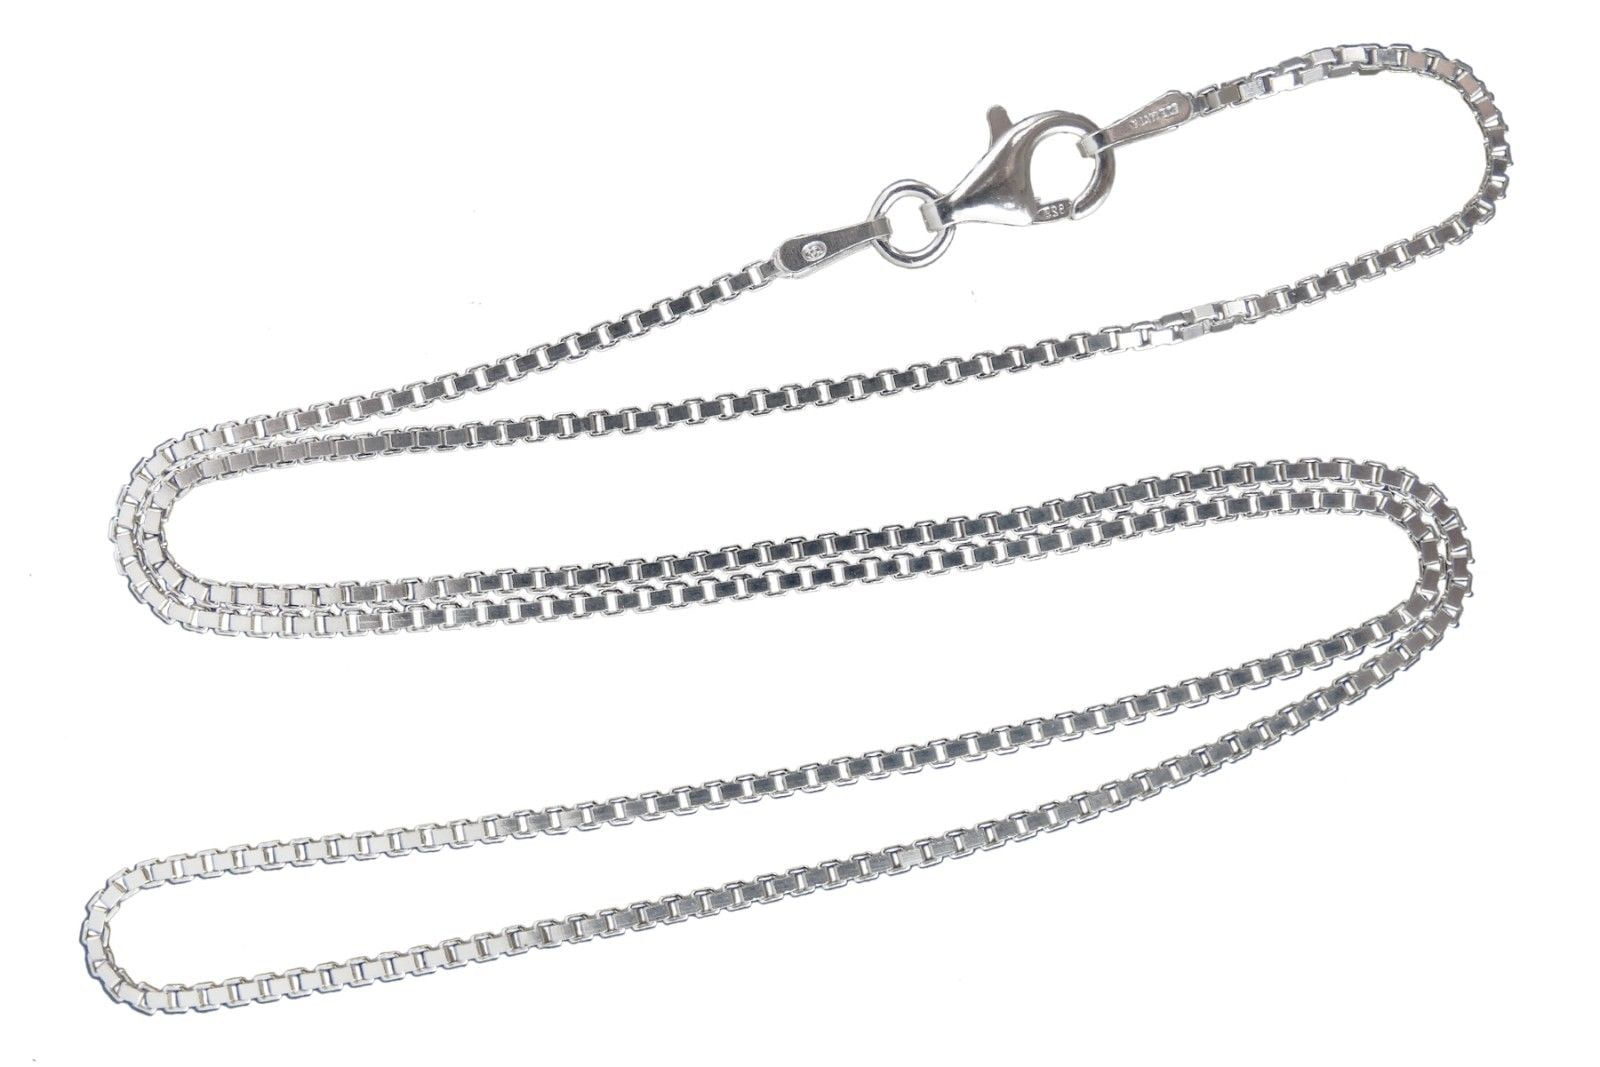 22 24 FashionJunkie4Life Sterling Silver 1.6mm Diamond-Cut Style Rope Chain Necklace 16 30 Lobster Clasp 20 18 